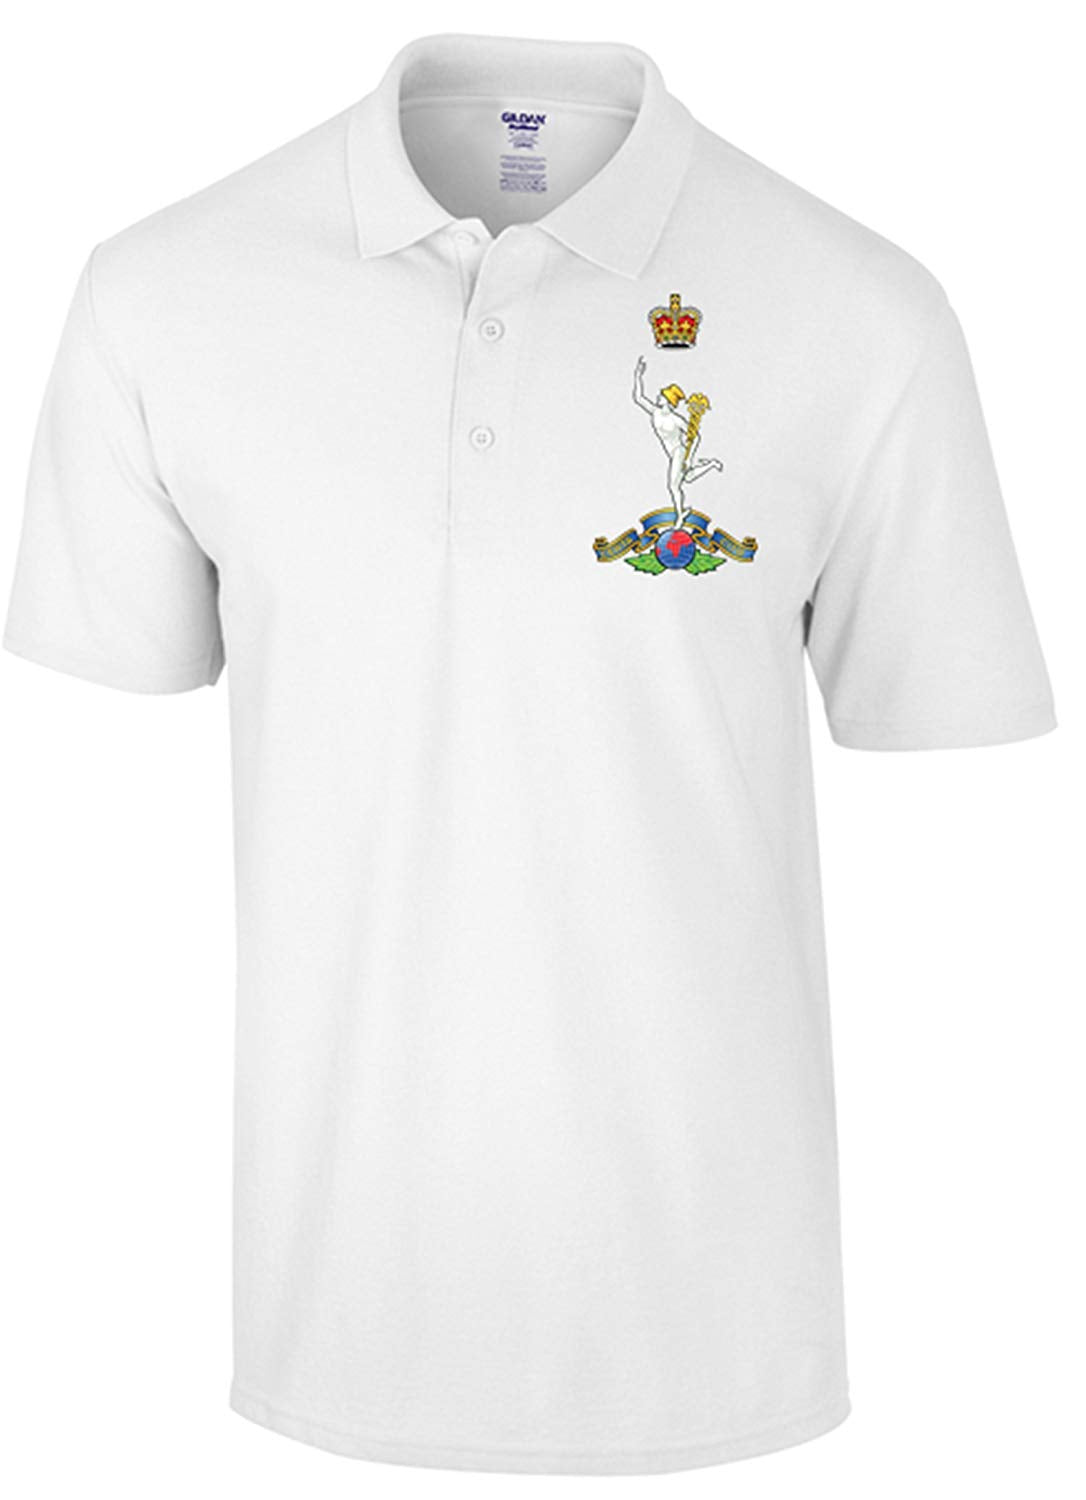 Royal Signals Polo Shirt - Army 1157 kit White / M Army 1157 Kit Veterans Owned Business